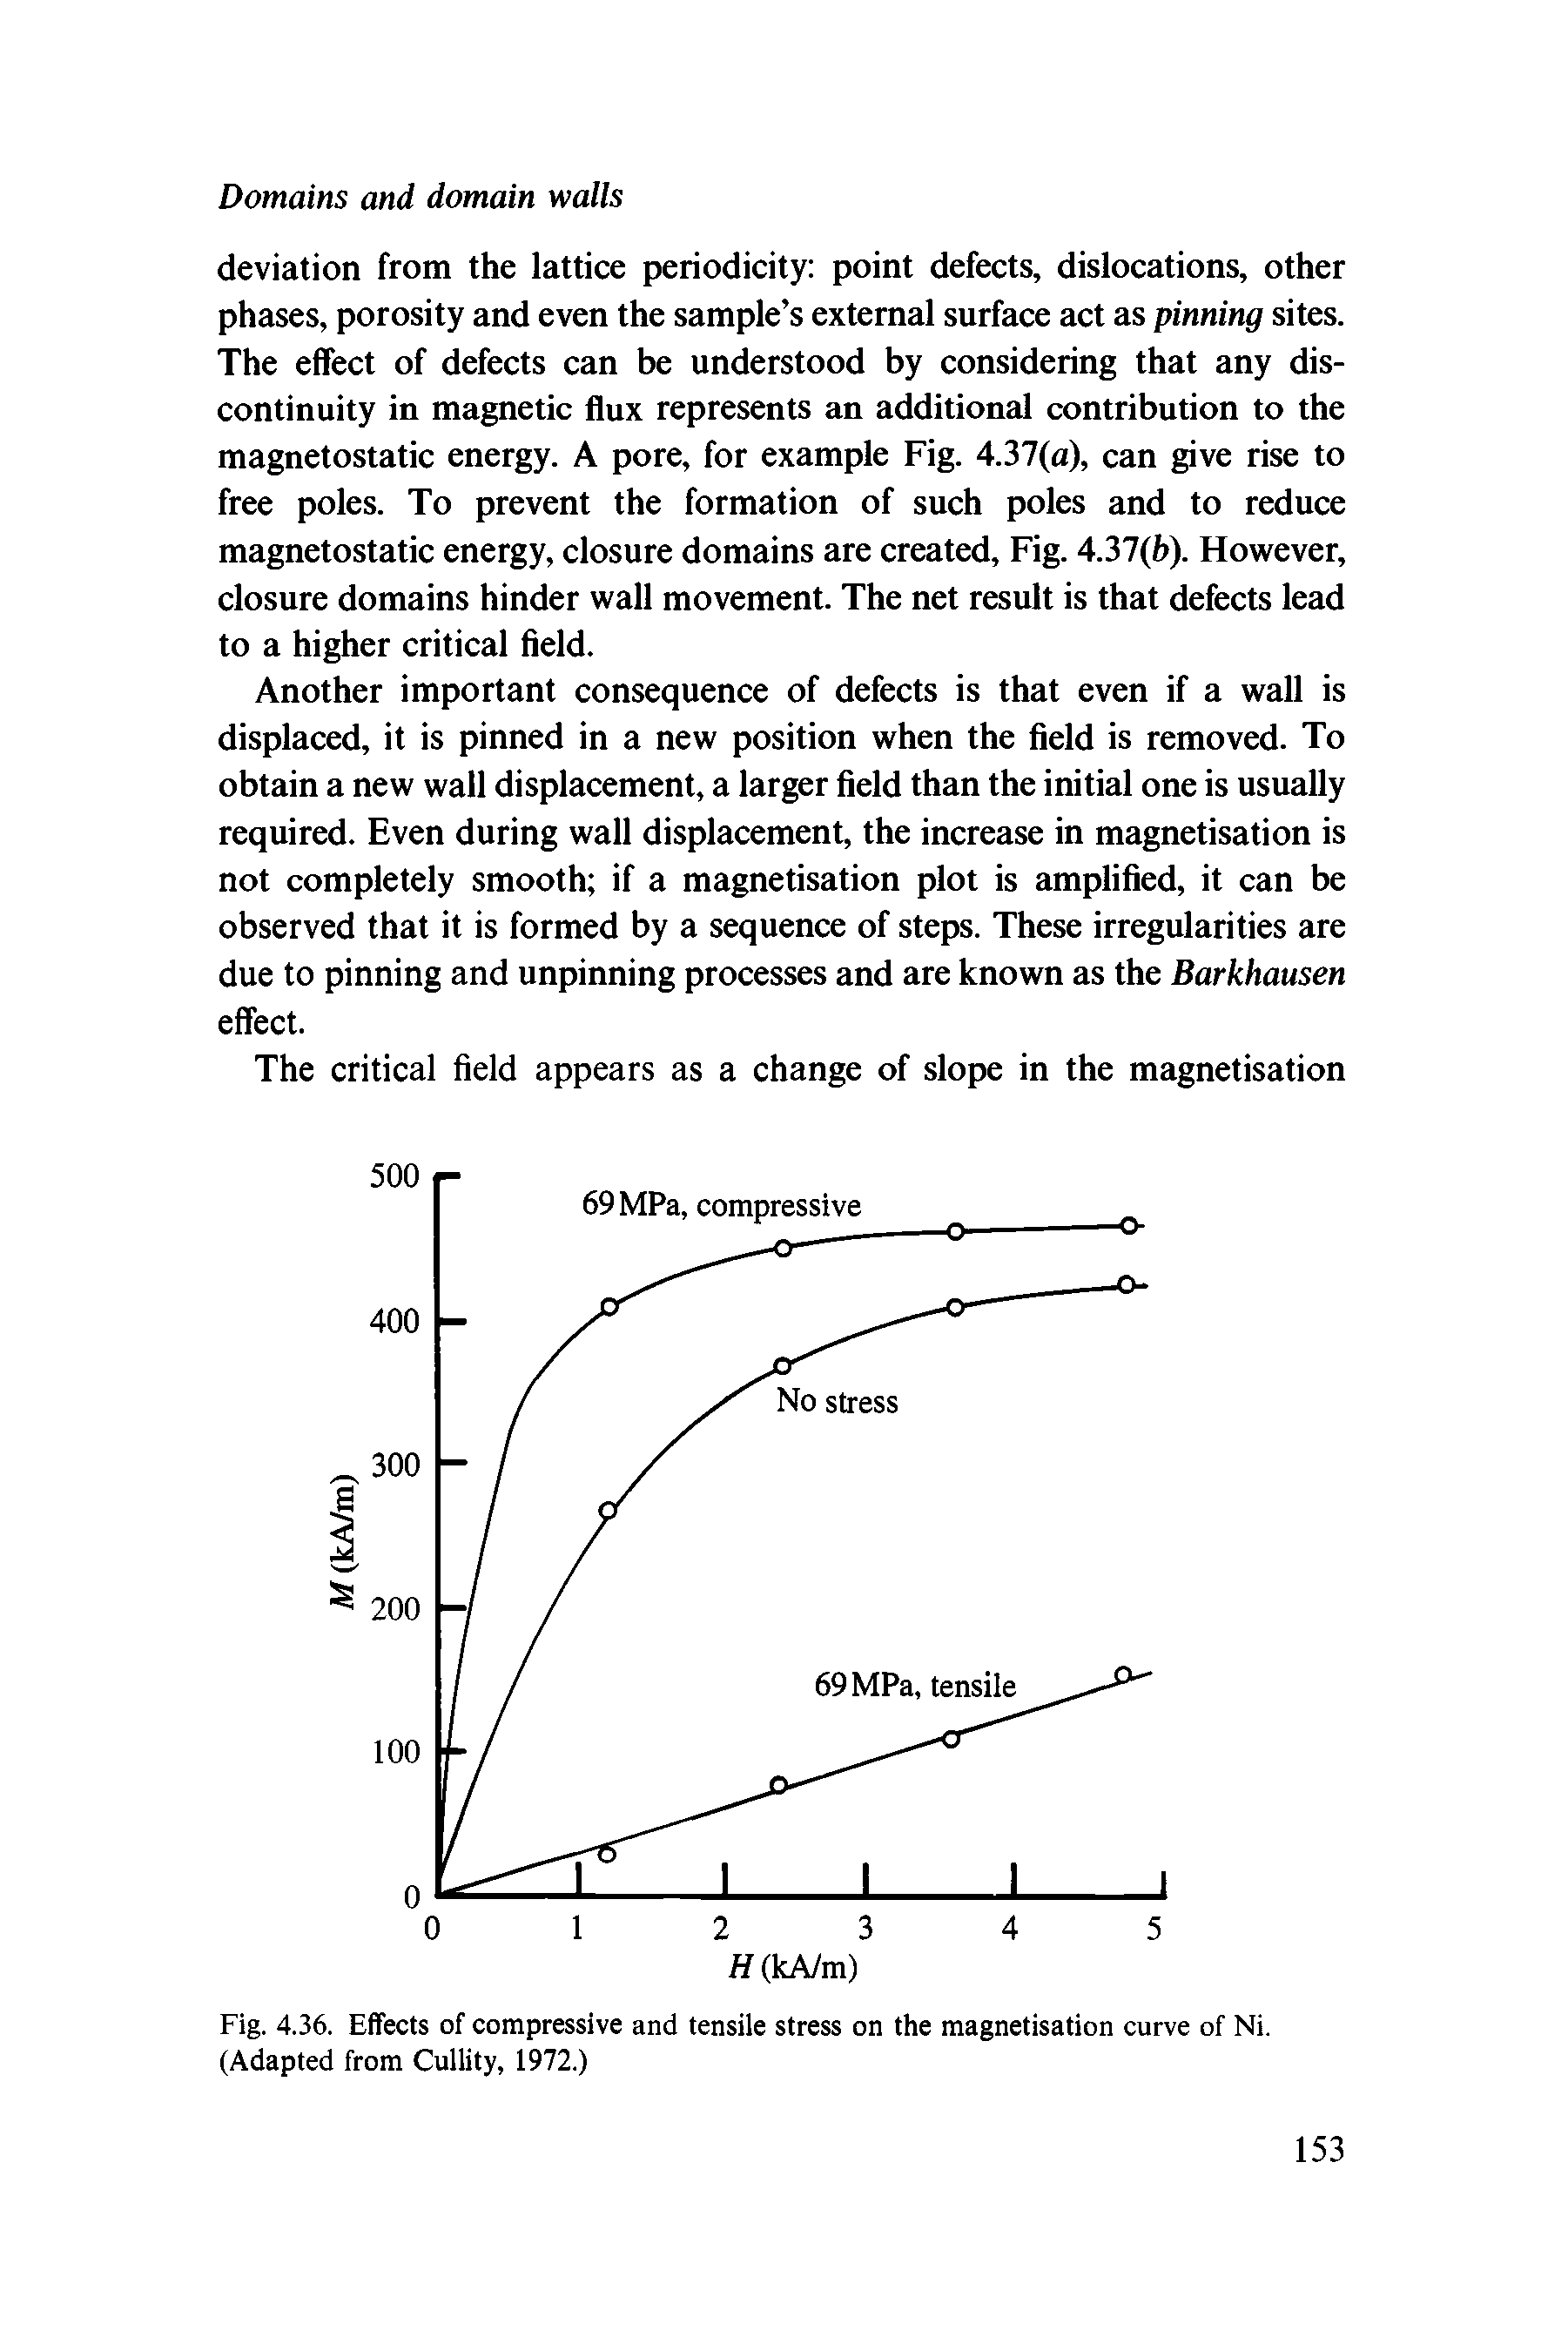 Fig. 4.36. Effects of compressive and tensile stress on the magnetisation curve of Ni. (Adapted from Cullity, 1972.)...